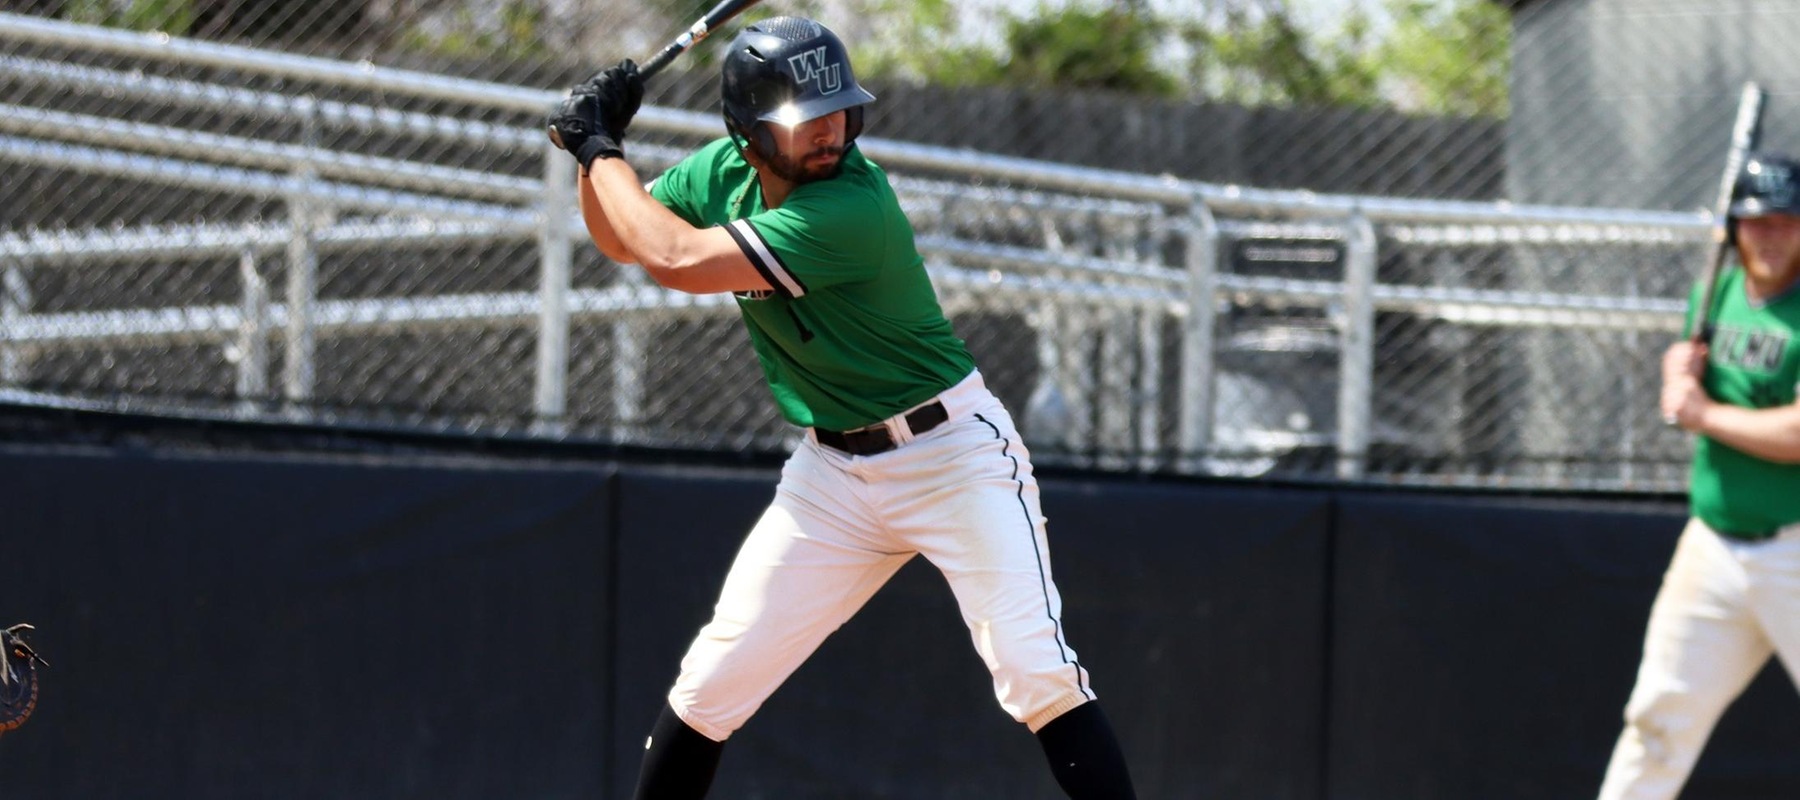 Nick Nocella had a double in game 1 and a homer in game 2 at Post. Copyright 2023; Wilmington University. All rights reserved. Photo by Dan Lauletta. April 5, 2023 vs. Bloomfield.